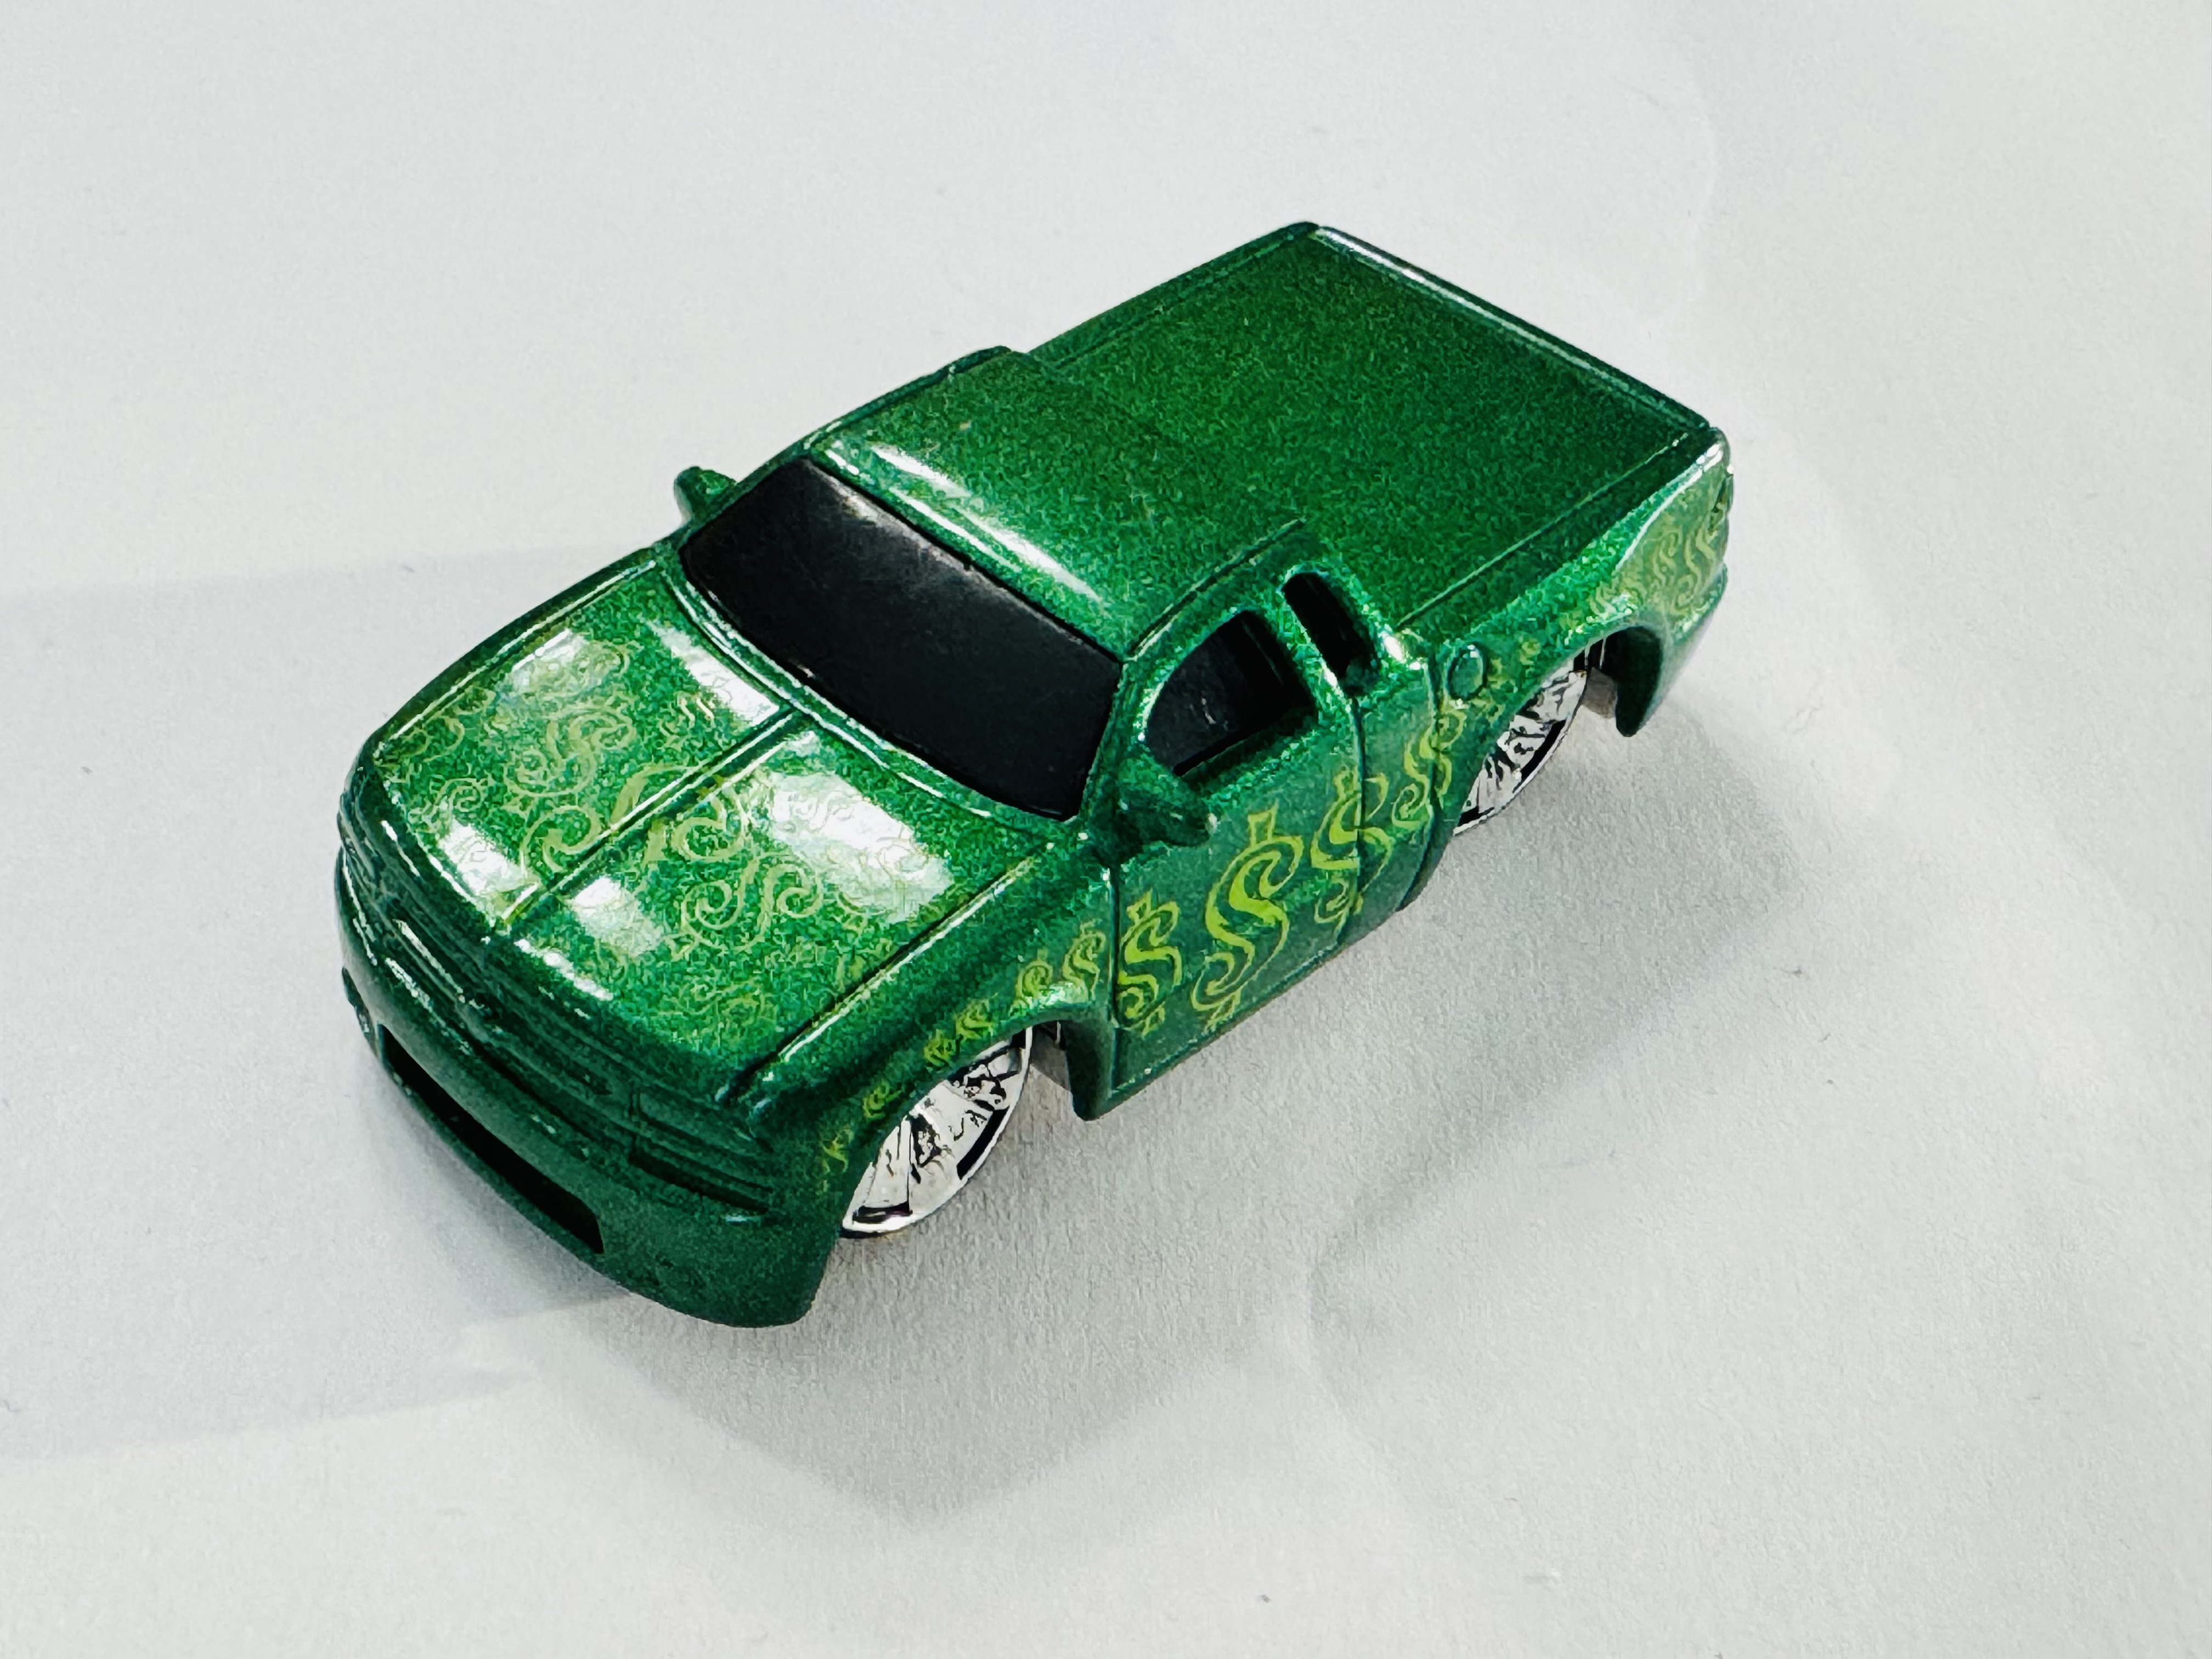 Hot Wheels Chevy S-10